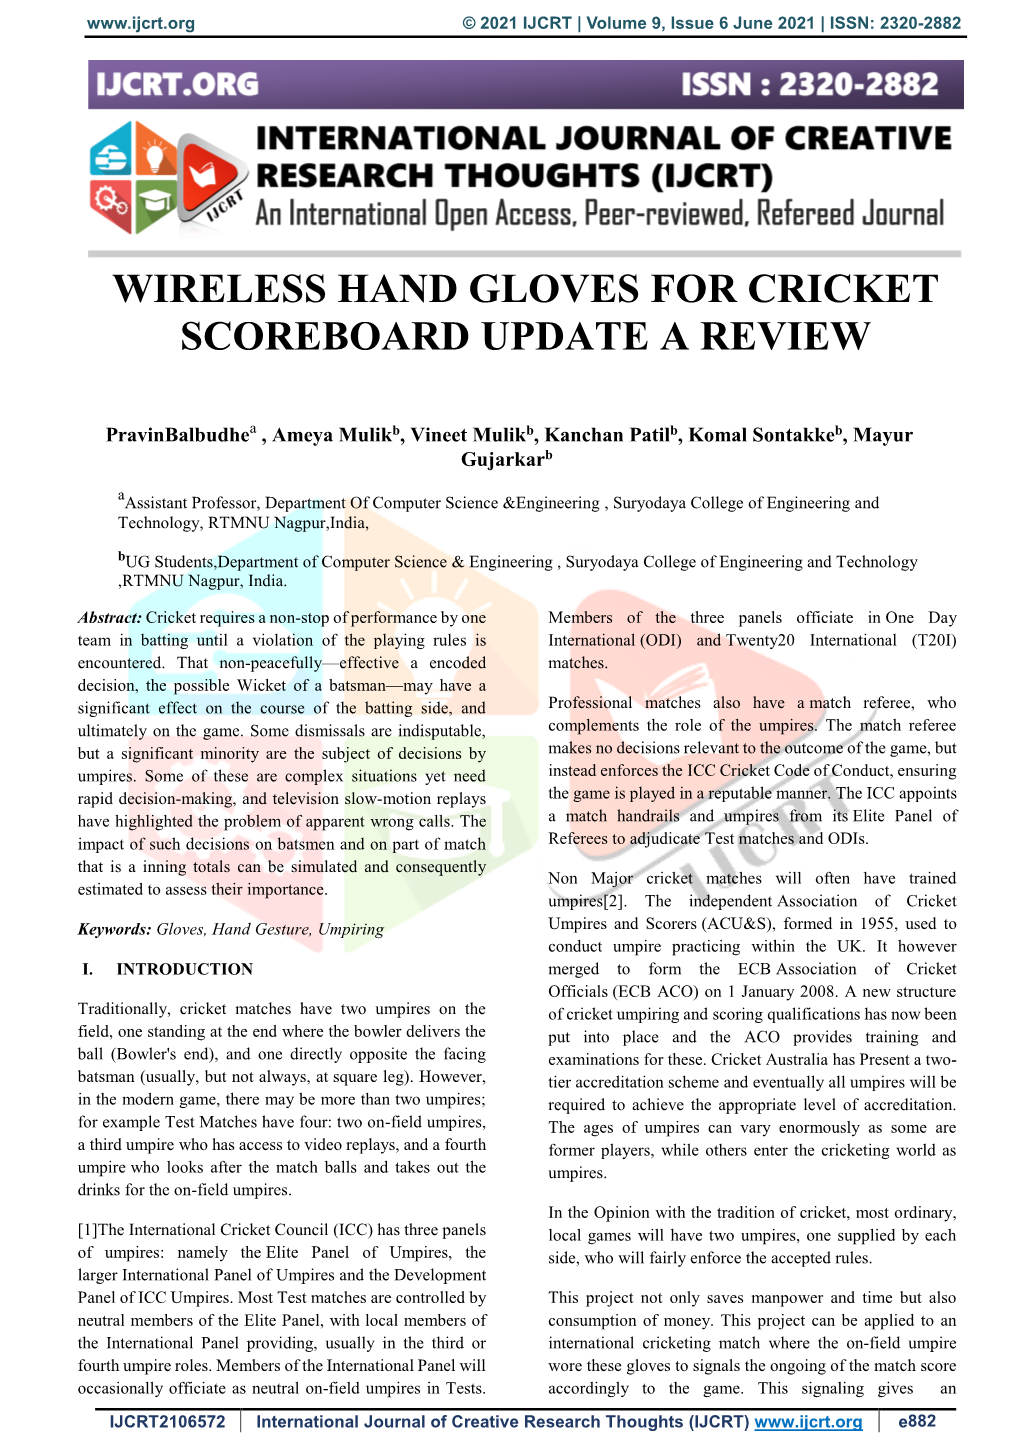 Wireless Hand Gloves for Cricket Scoreboard Update a Review